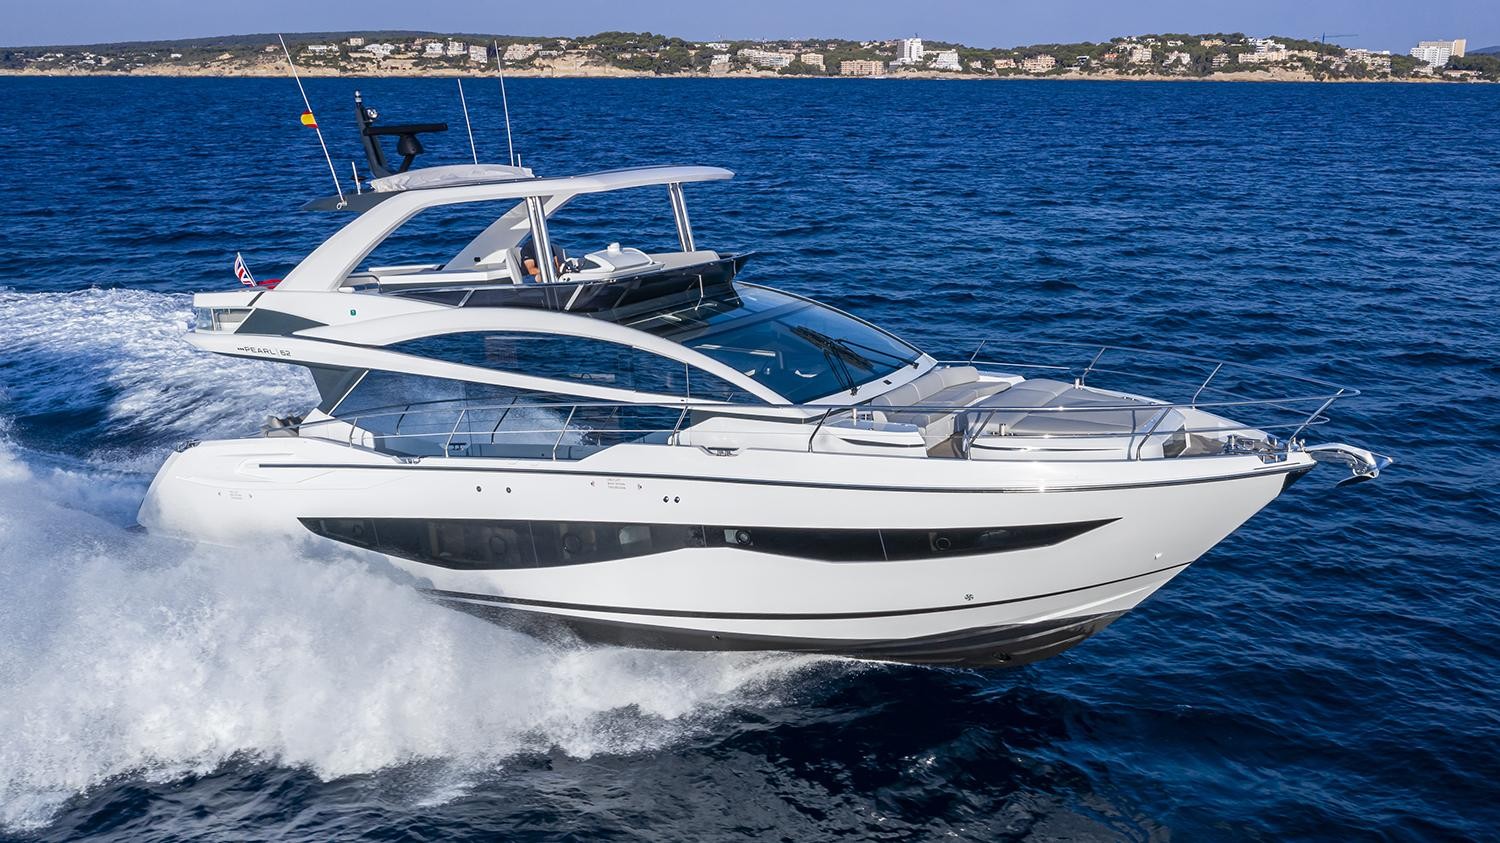 Pearl Yachts announce their attendance at the Southampton Boats2020